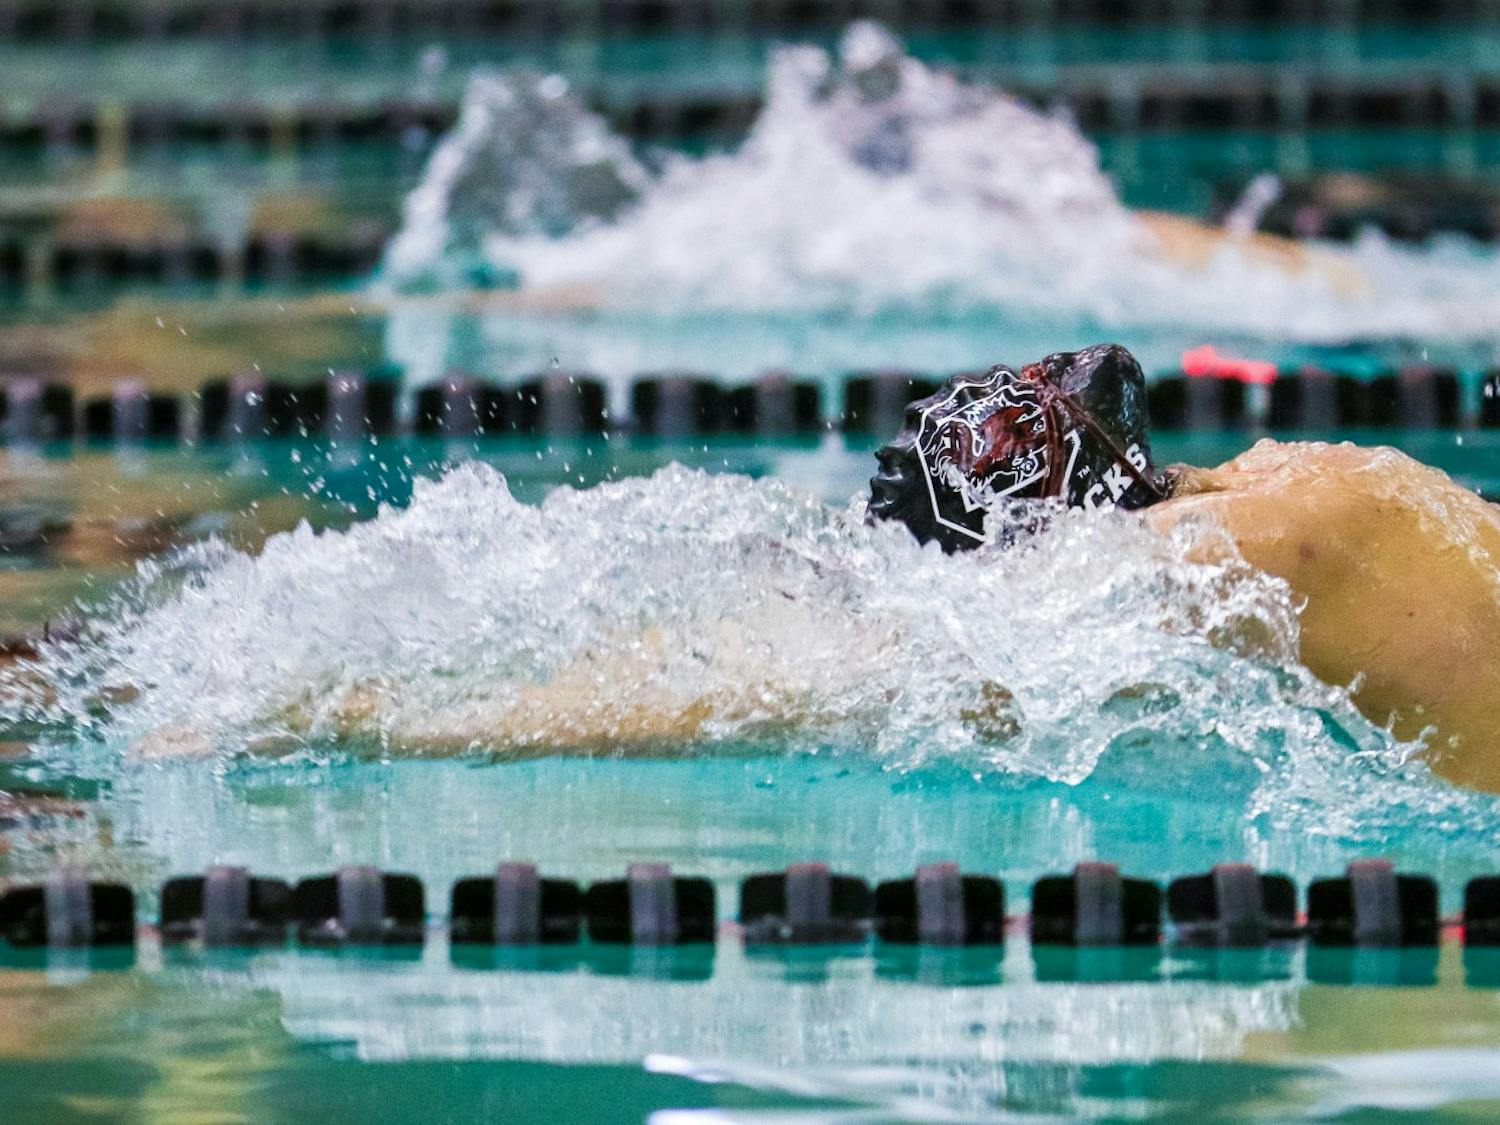 Now-senior Maddy Norford swims the 100-meter breaststroke during the Gamecocks’ meet against Georgia Tech on Jan. 18, 2020. The team earned a win at home, 197-103. &nbsp;